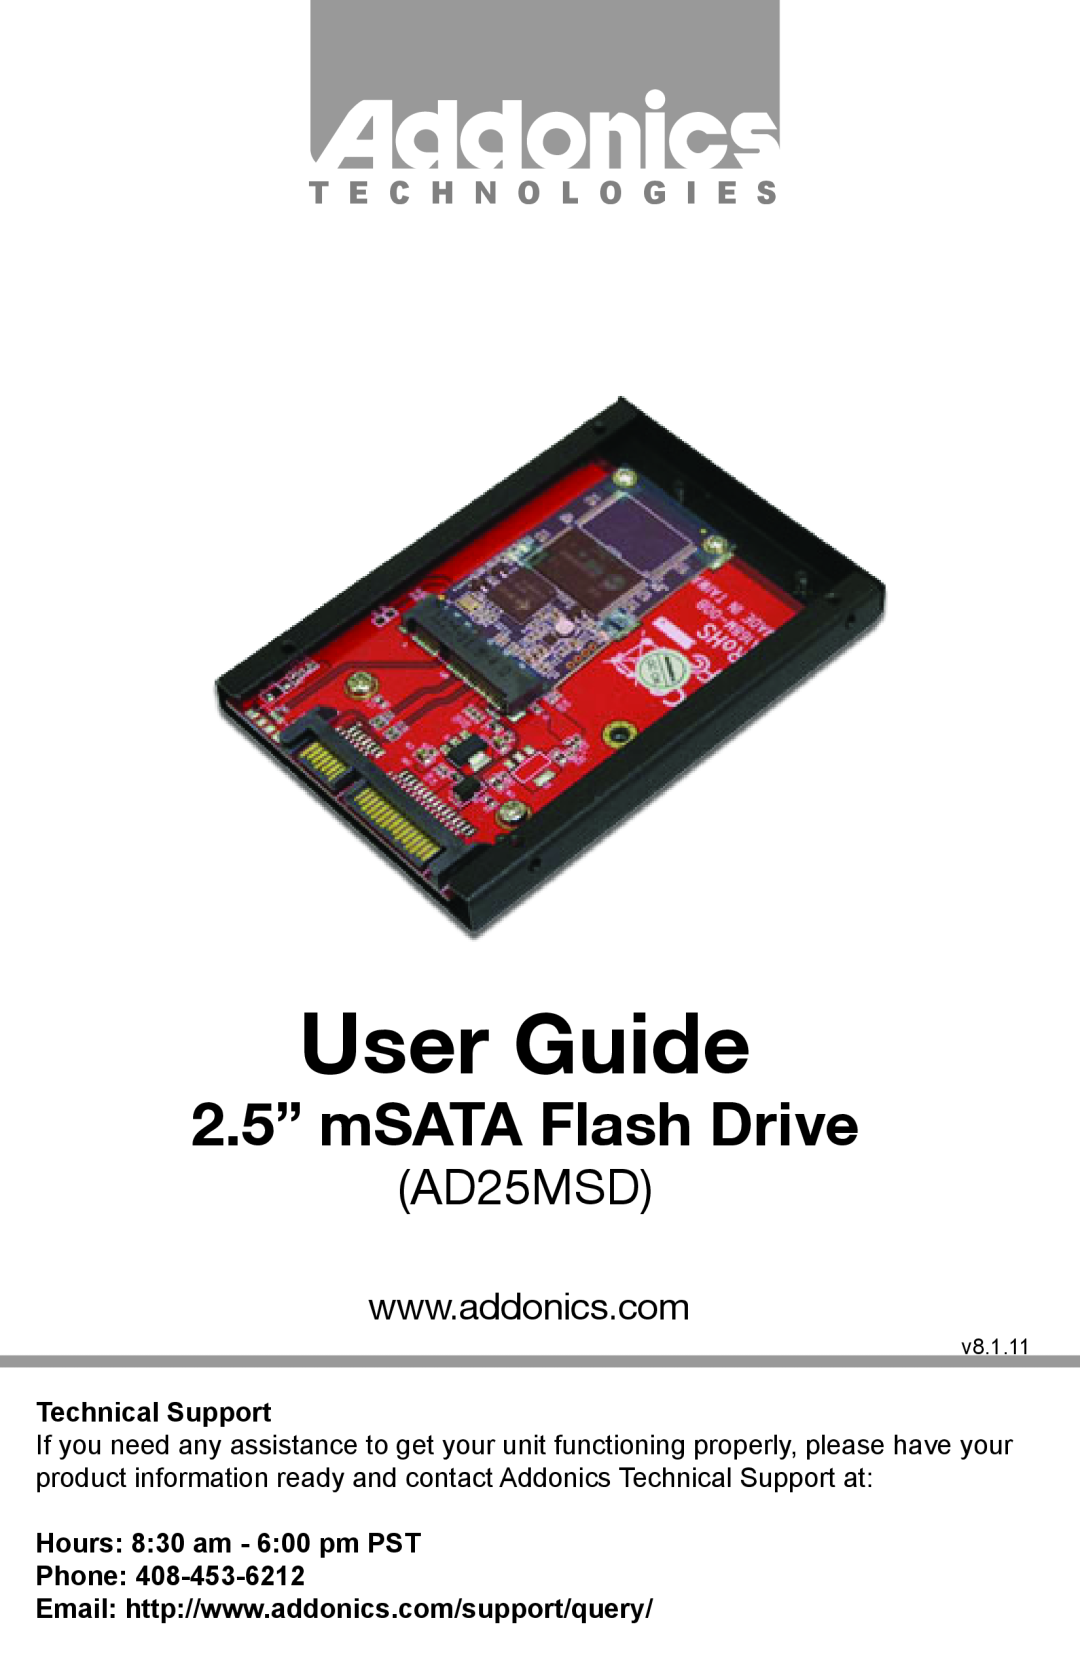 Addonics Technologies AD25MSD manual User Guide, 2.5” mSATA Flash Drive, T E C H N O L O G I E S, Technical Support 